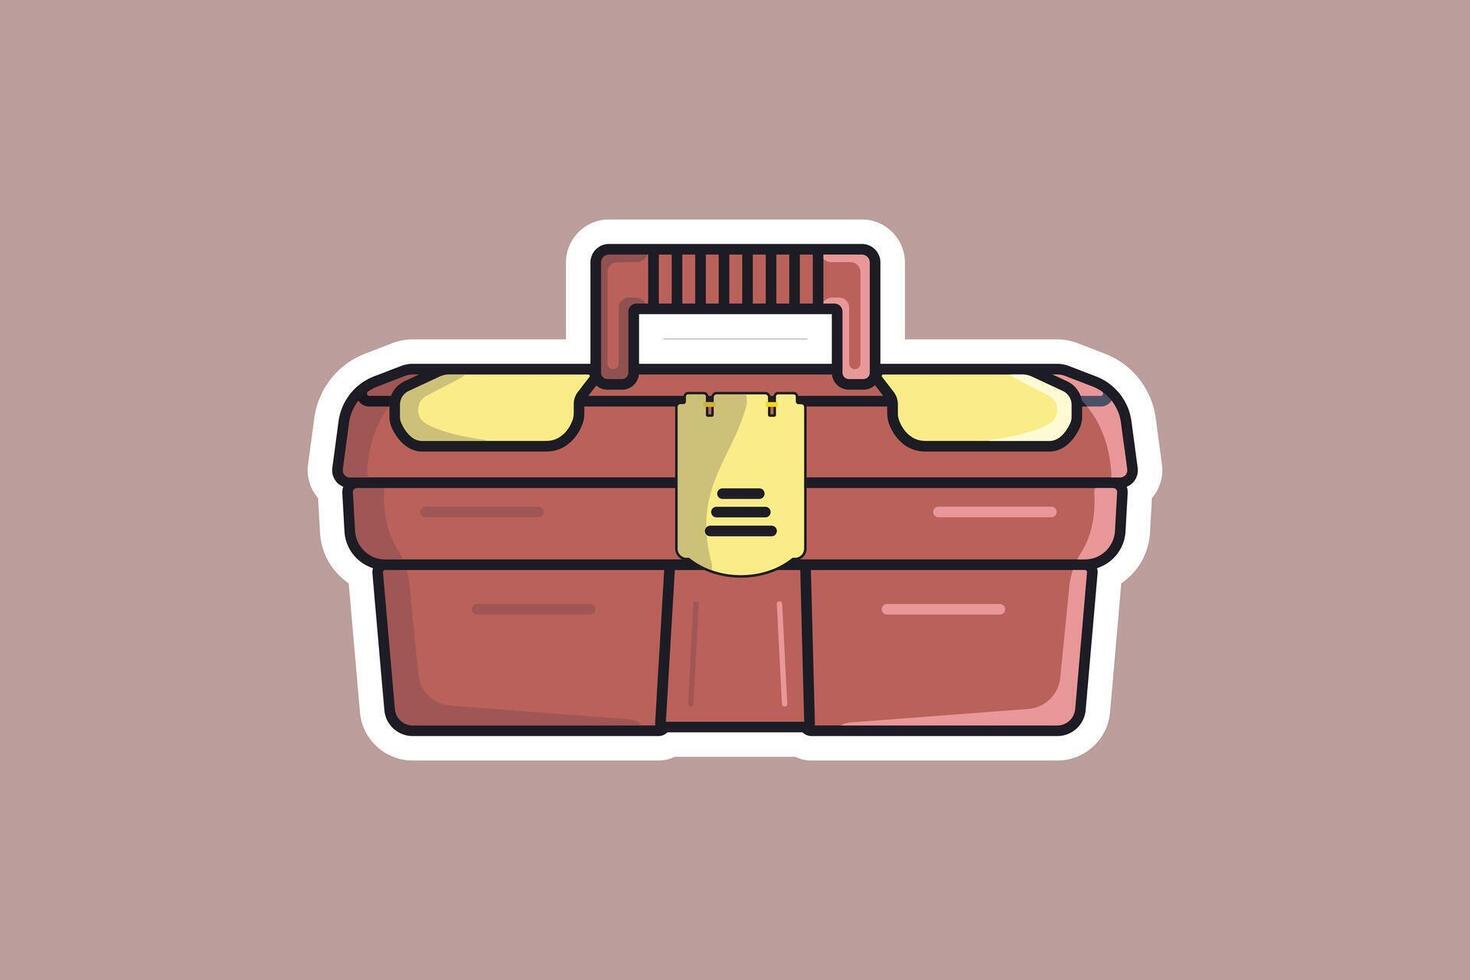 Plumber Repairing Tool Box Sticker vector illustration. Plumber working tool equipment icon concept. Toolkit for builder or industrial store sticker design logo icon.